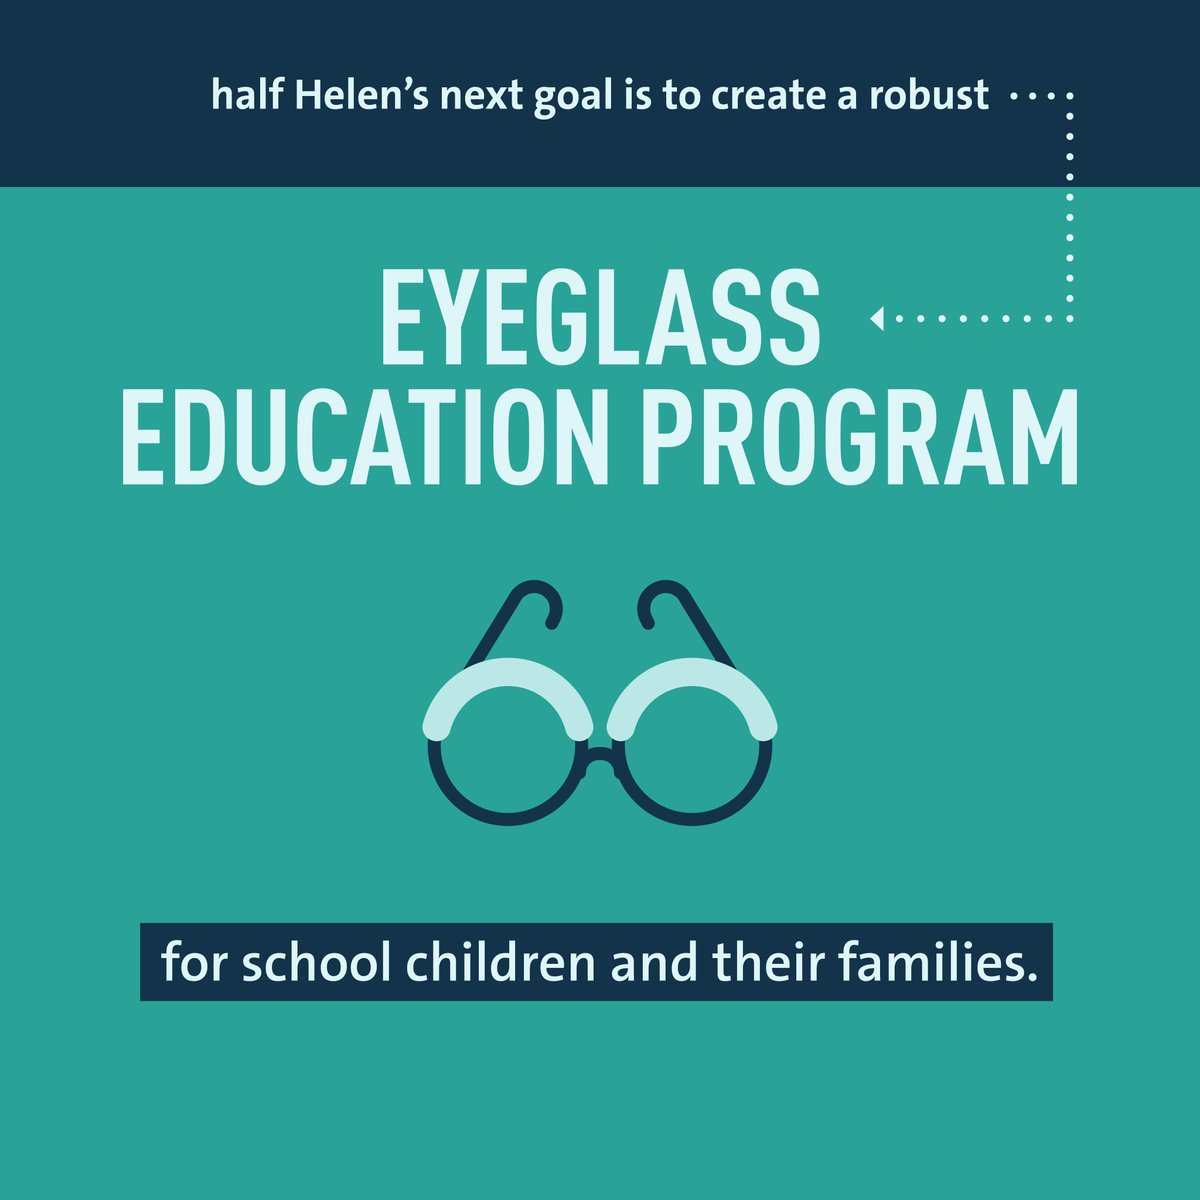 Early detection and treatment of vision issues can make a significant difference in a child’s academic career and future. half Helen provides no-cost vision screenings and glasses to help children reach their full potential. msdf.co/4aRWzmK